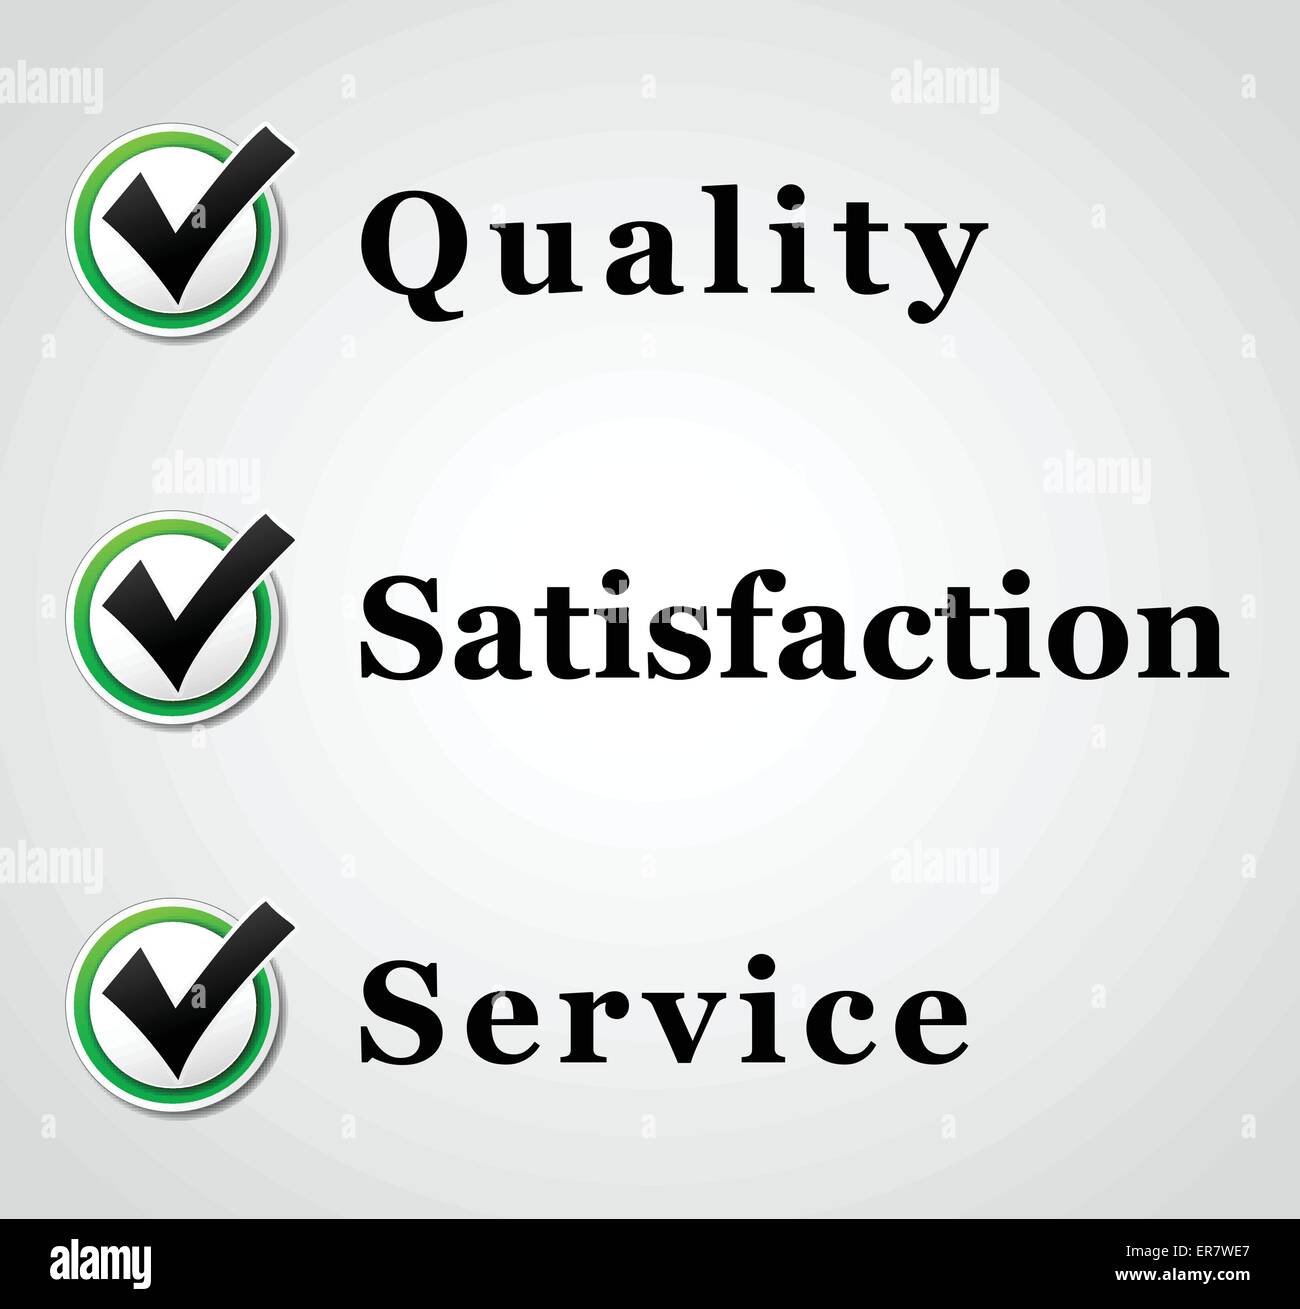 Vector illustration of quality service and satisfaction words Stock Vector